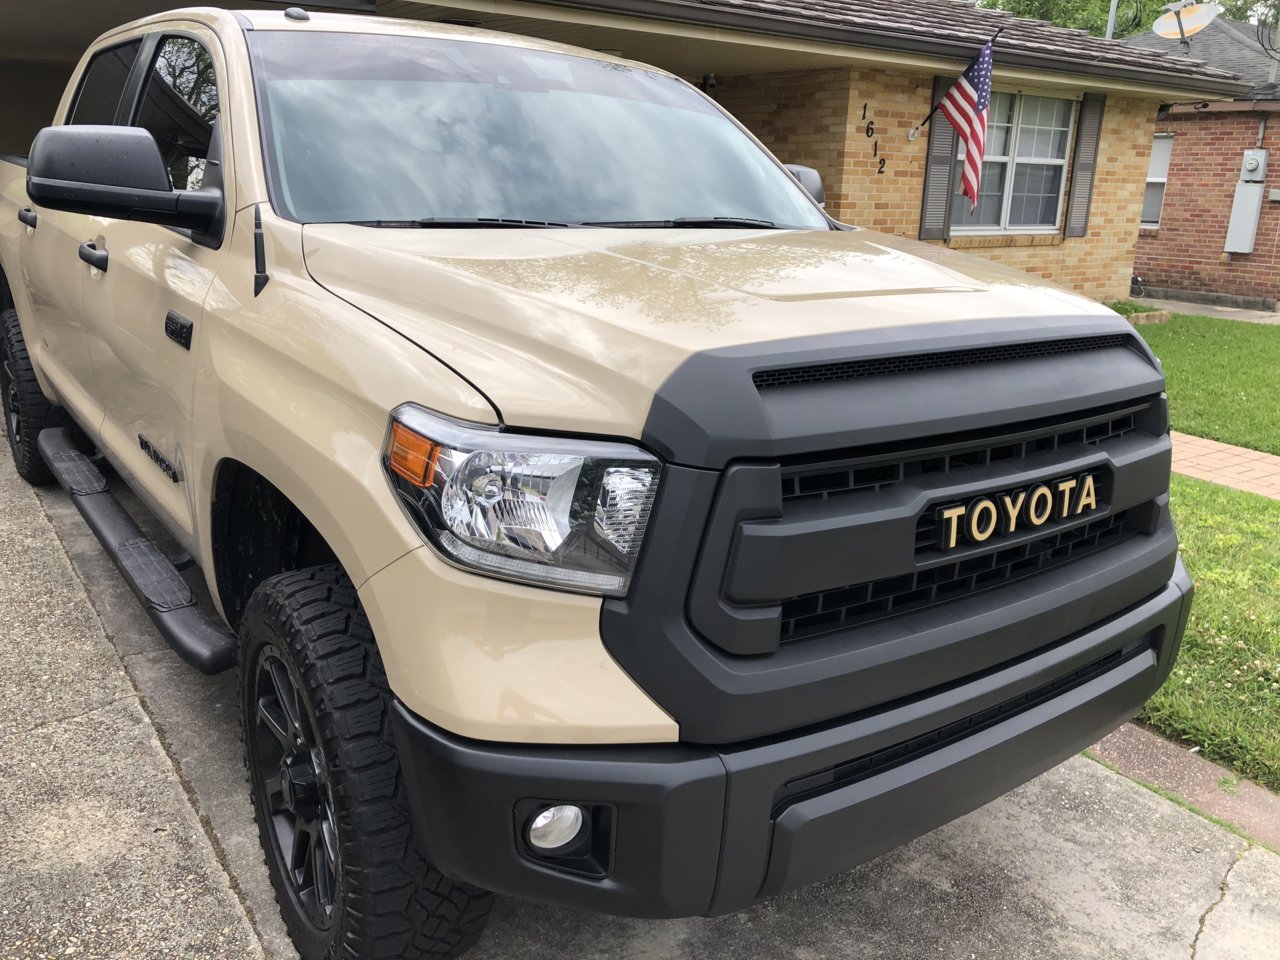 TRD Pro Grill for White Tundra | Toyota Tundra Forum